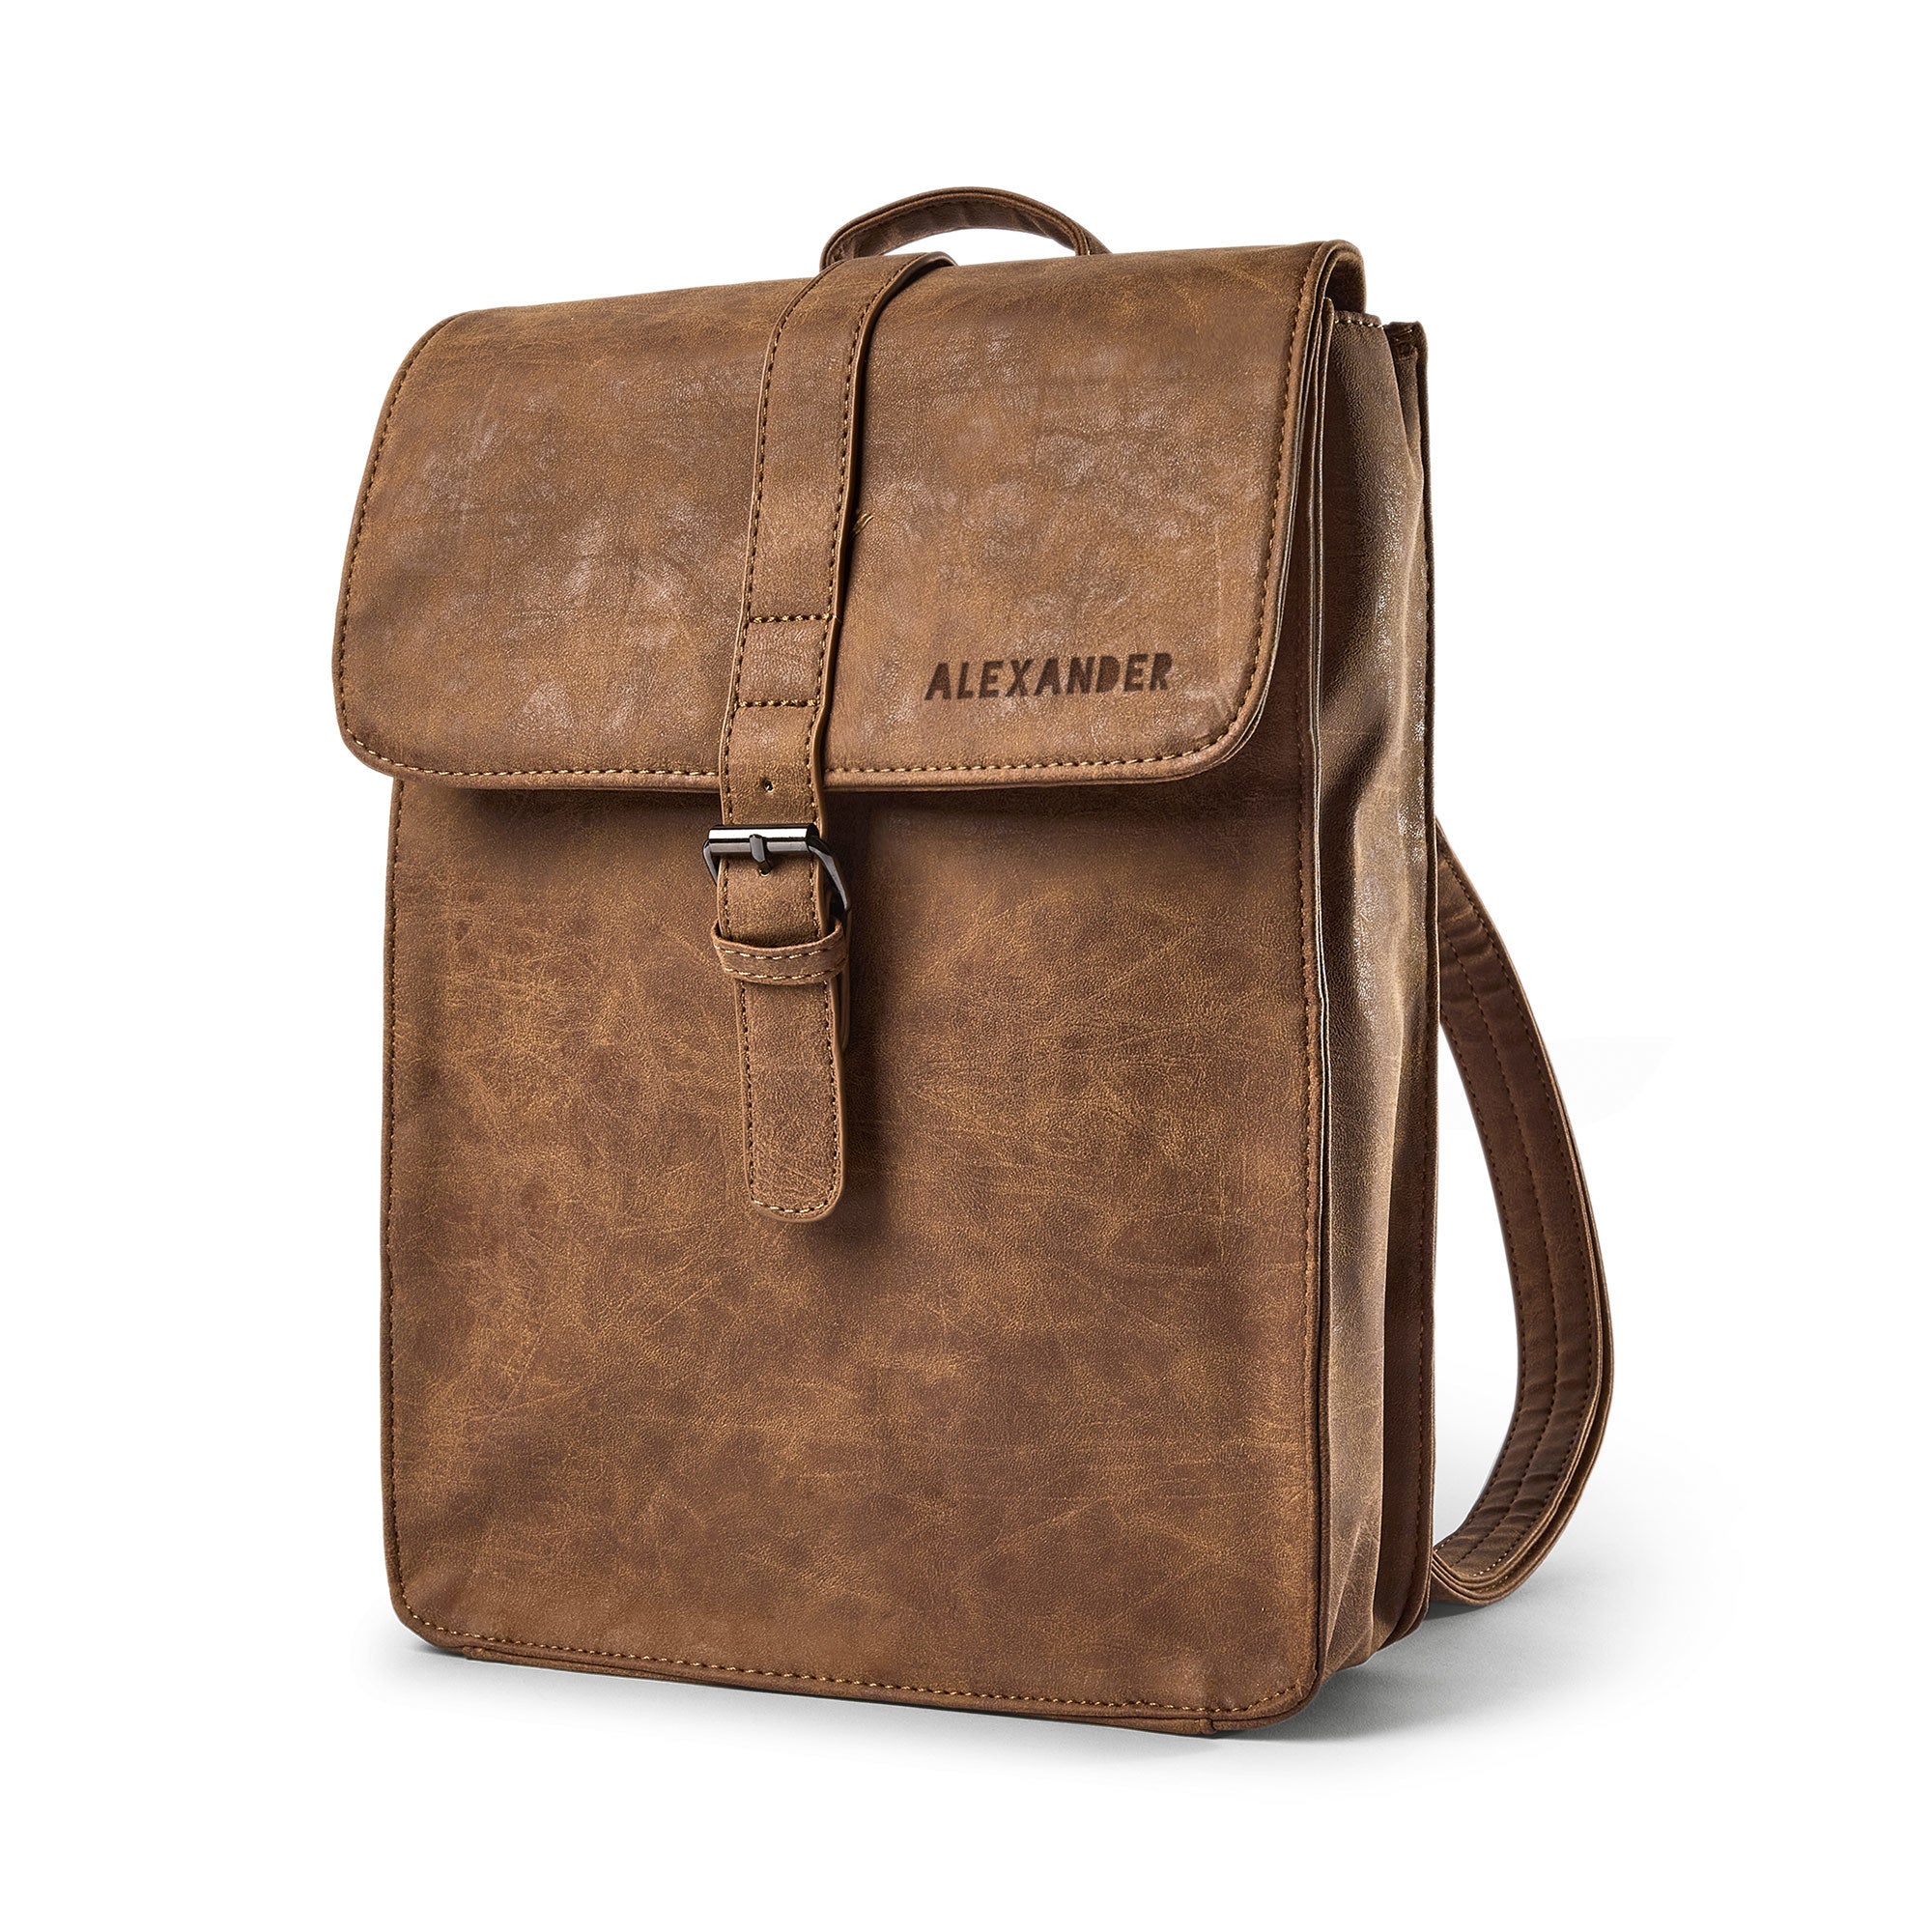 Personalised PU leather backpack - Small - Engraved with name/text